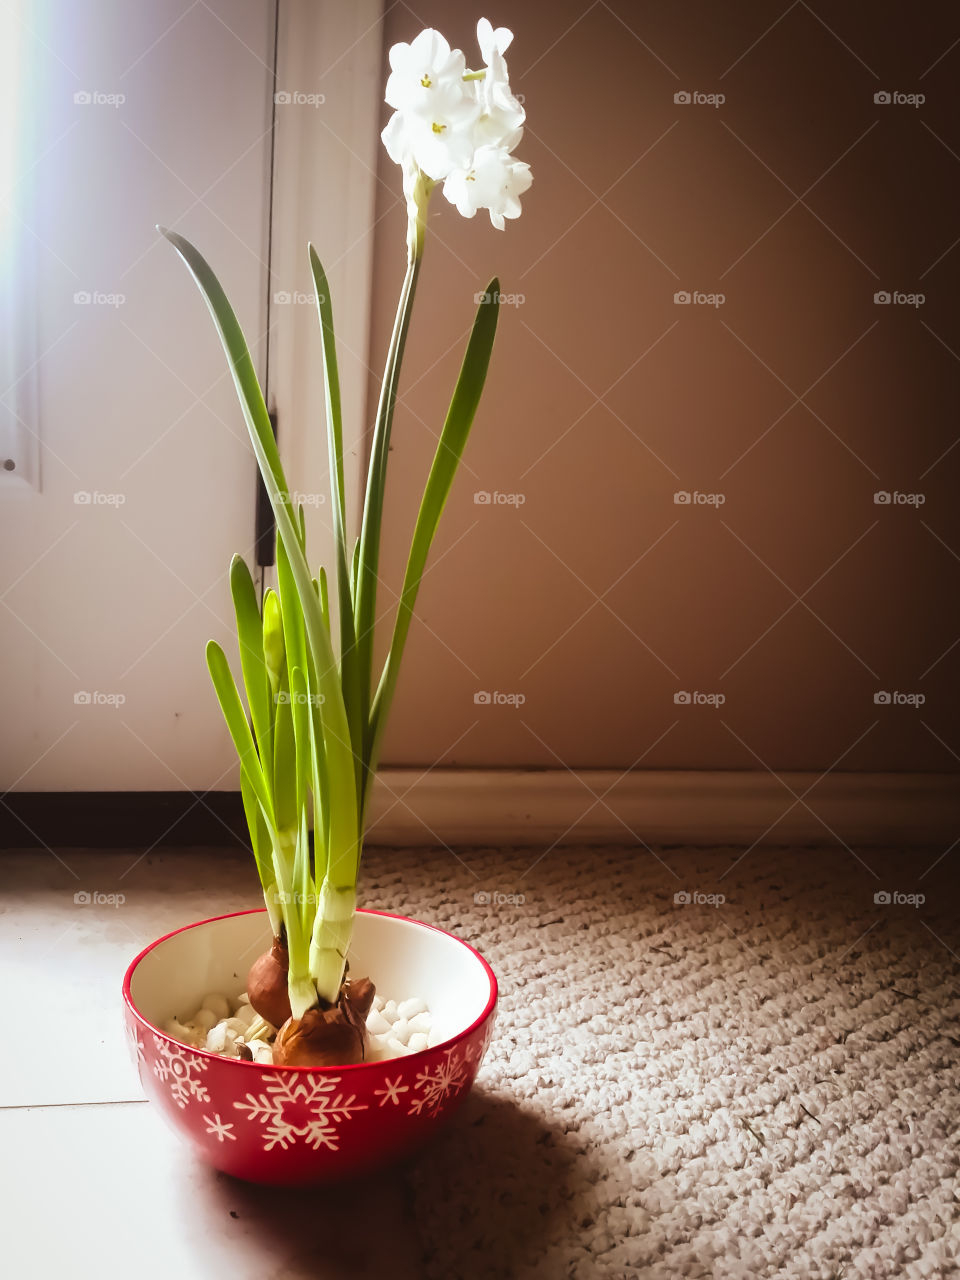 A bulb plant growing in rocks in a bowl inside with a white flower